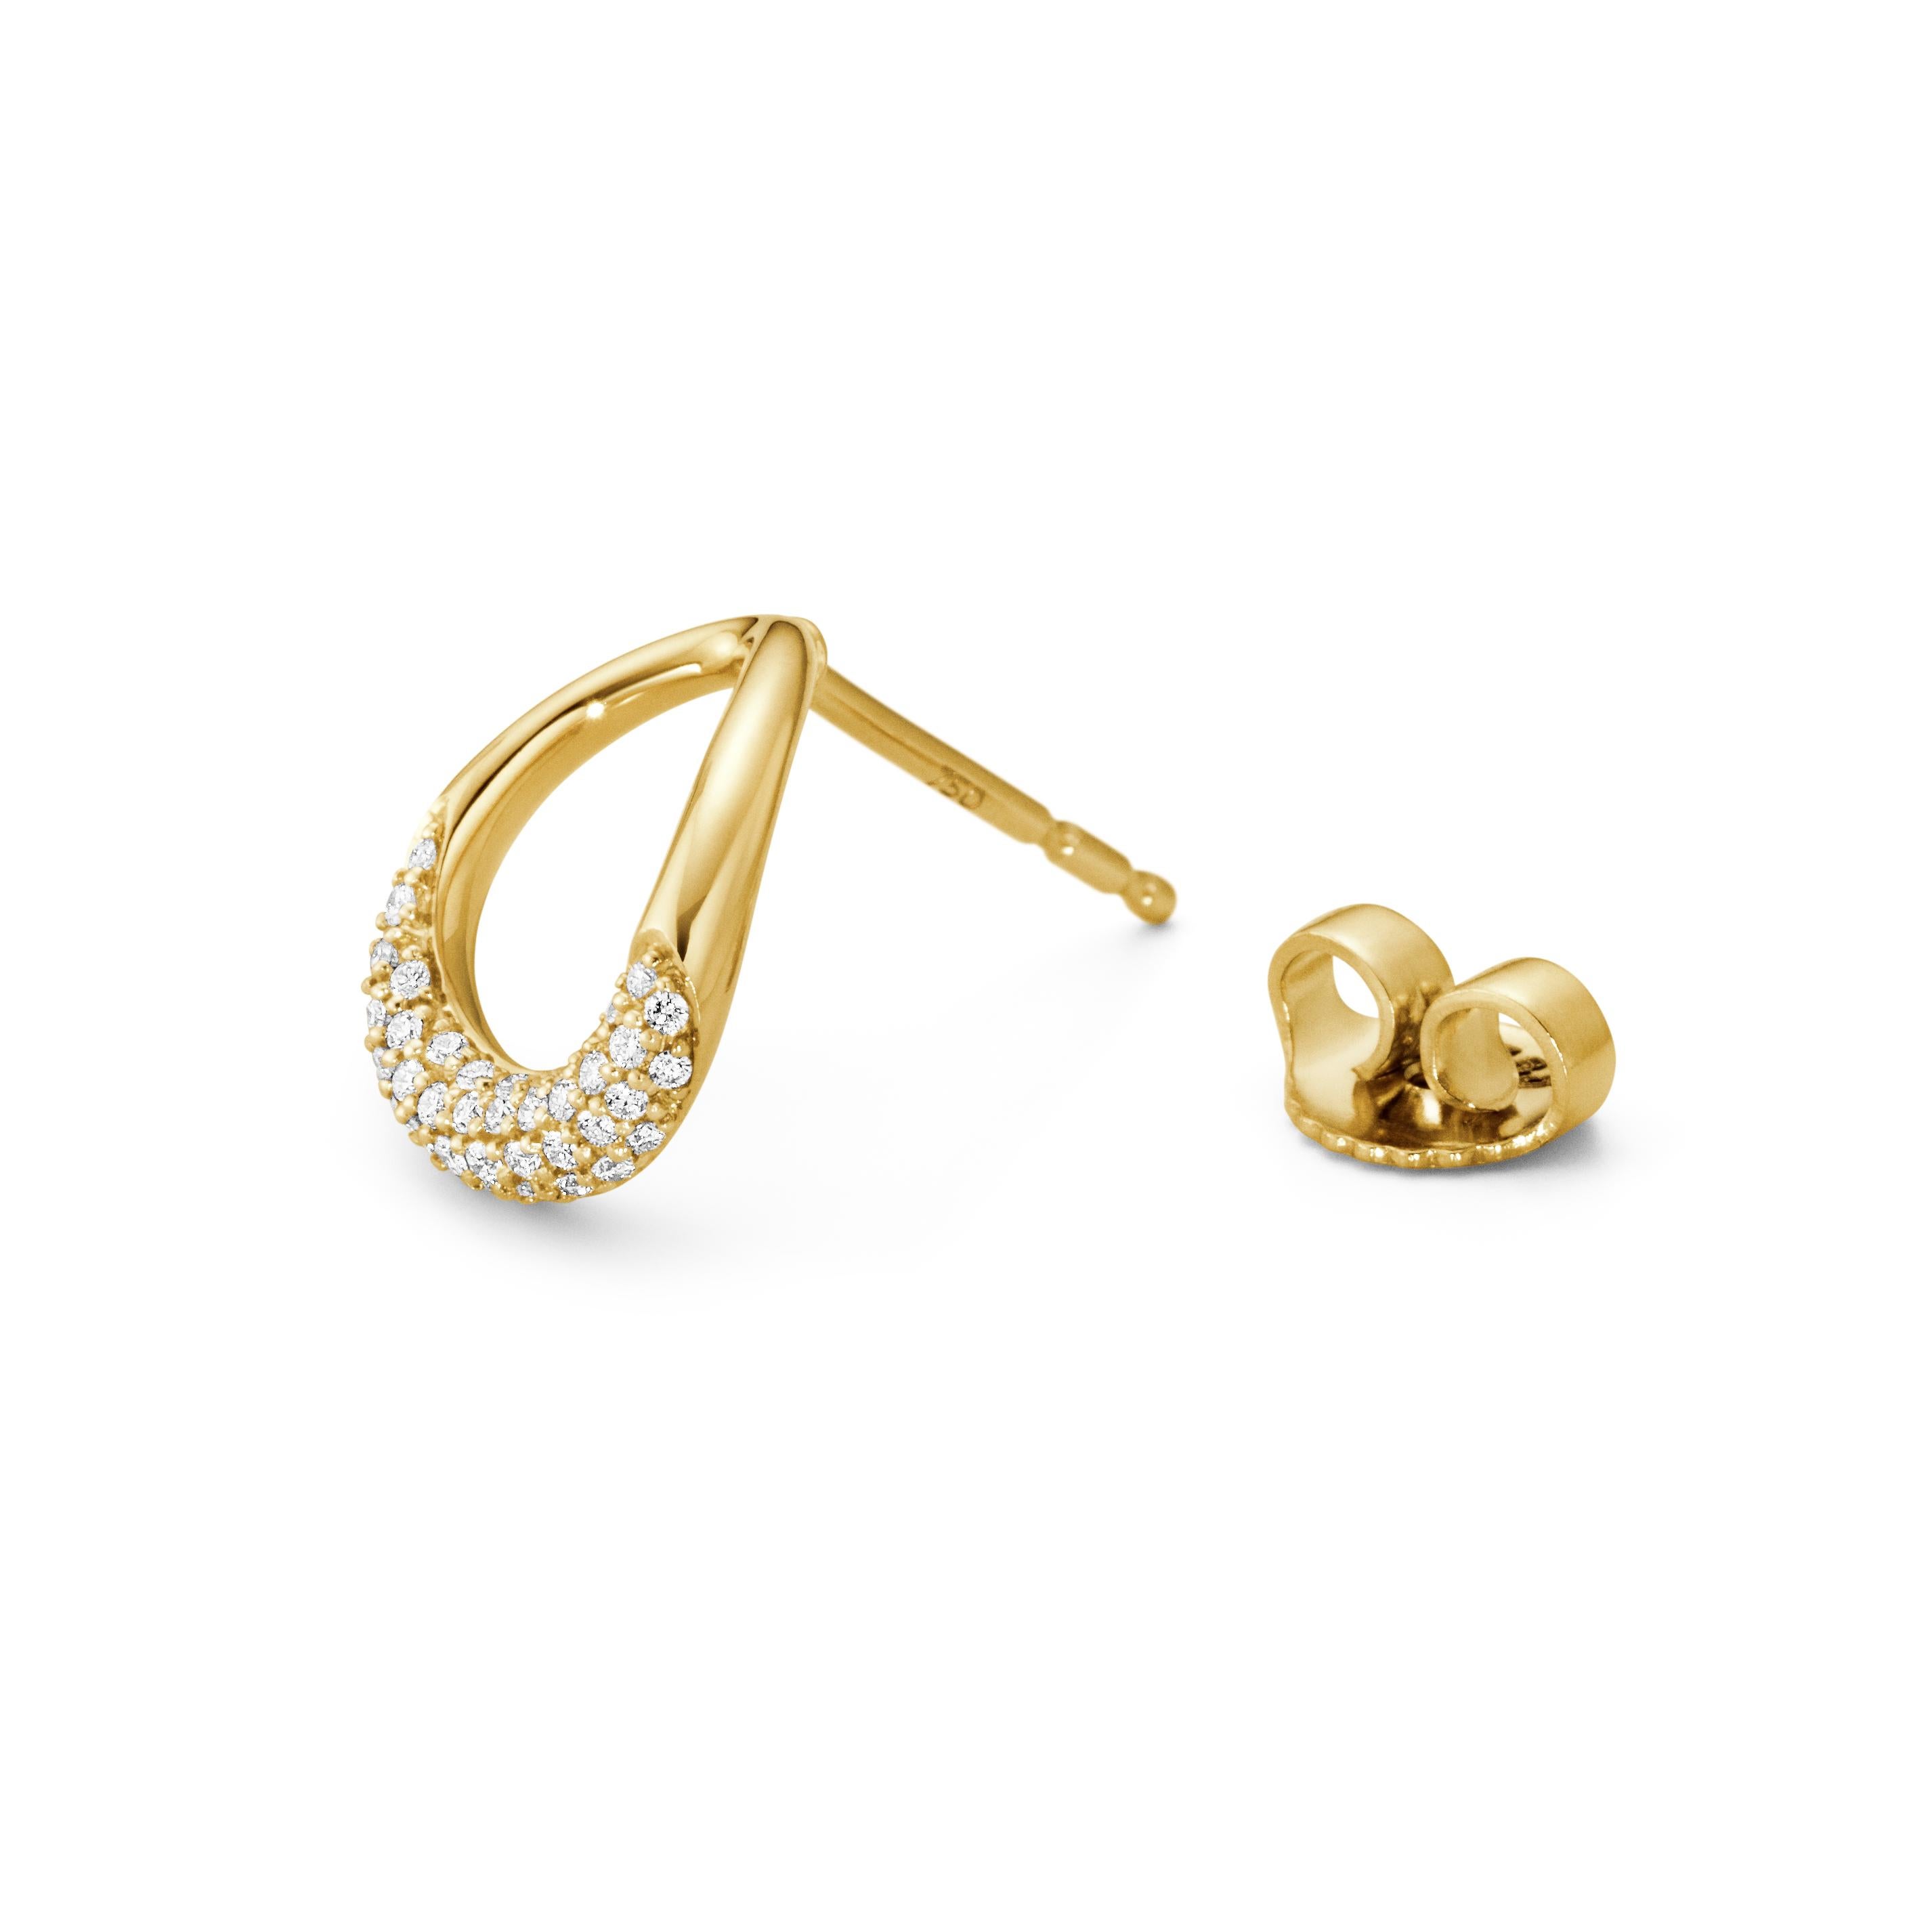 These dainty 18 kt gold ear studs add a subtle touch of elegance. Designed by Jacqueline Rabun as part of her Offspring collection, they include pavè-set brilliant cut diamonds individually set by hand - following an organic pattern that enhances